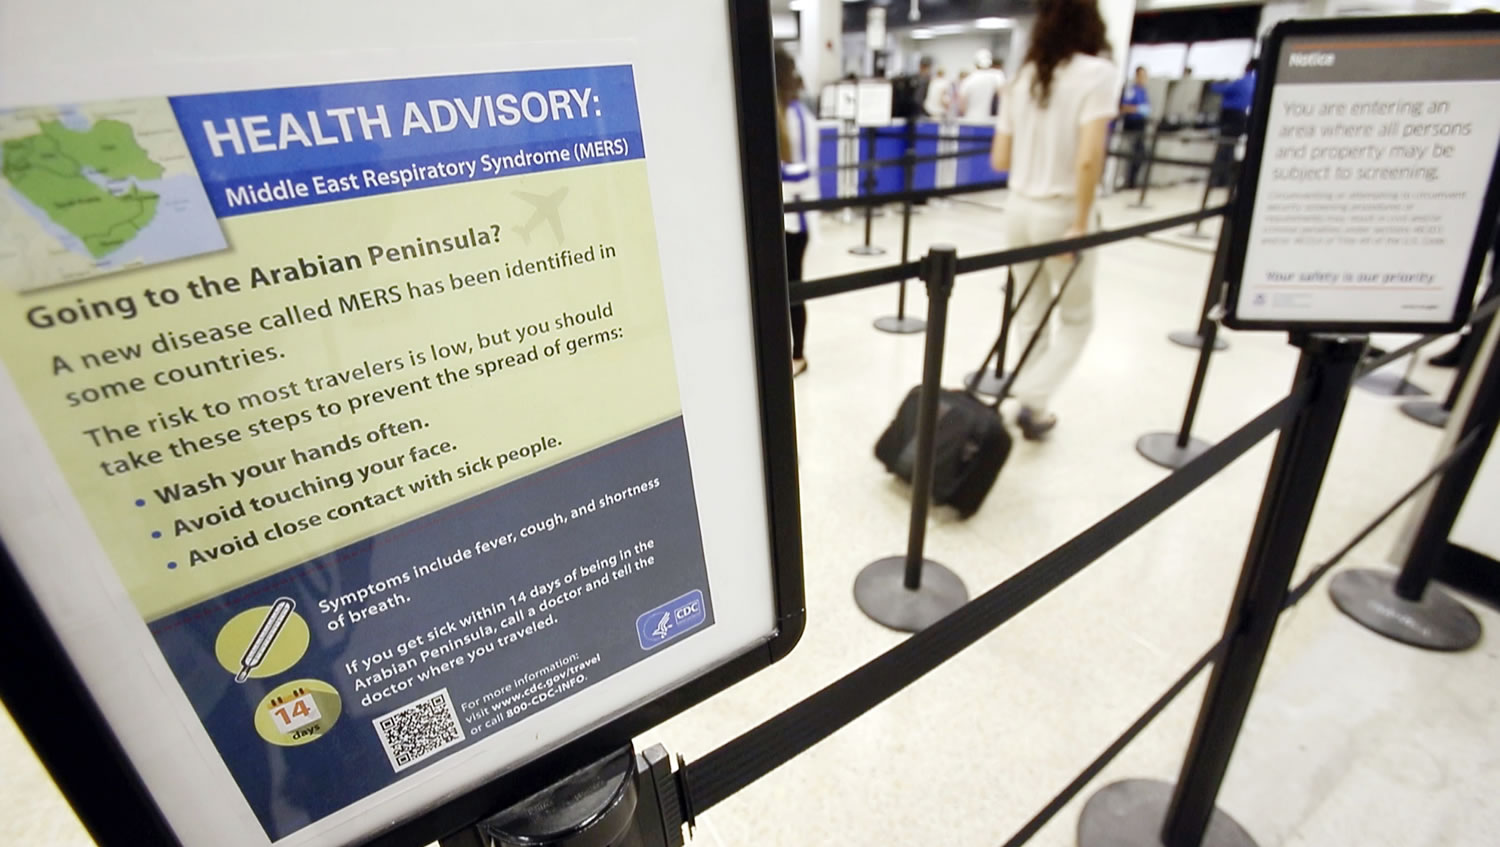 A Center for Disease Control health advisory warning travelers about the risks of MERS, or Middle East Respiratory Syndrome, is shown at a TSA screening area, Wednesday at Miami International Airport in Miami.